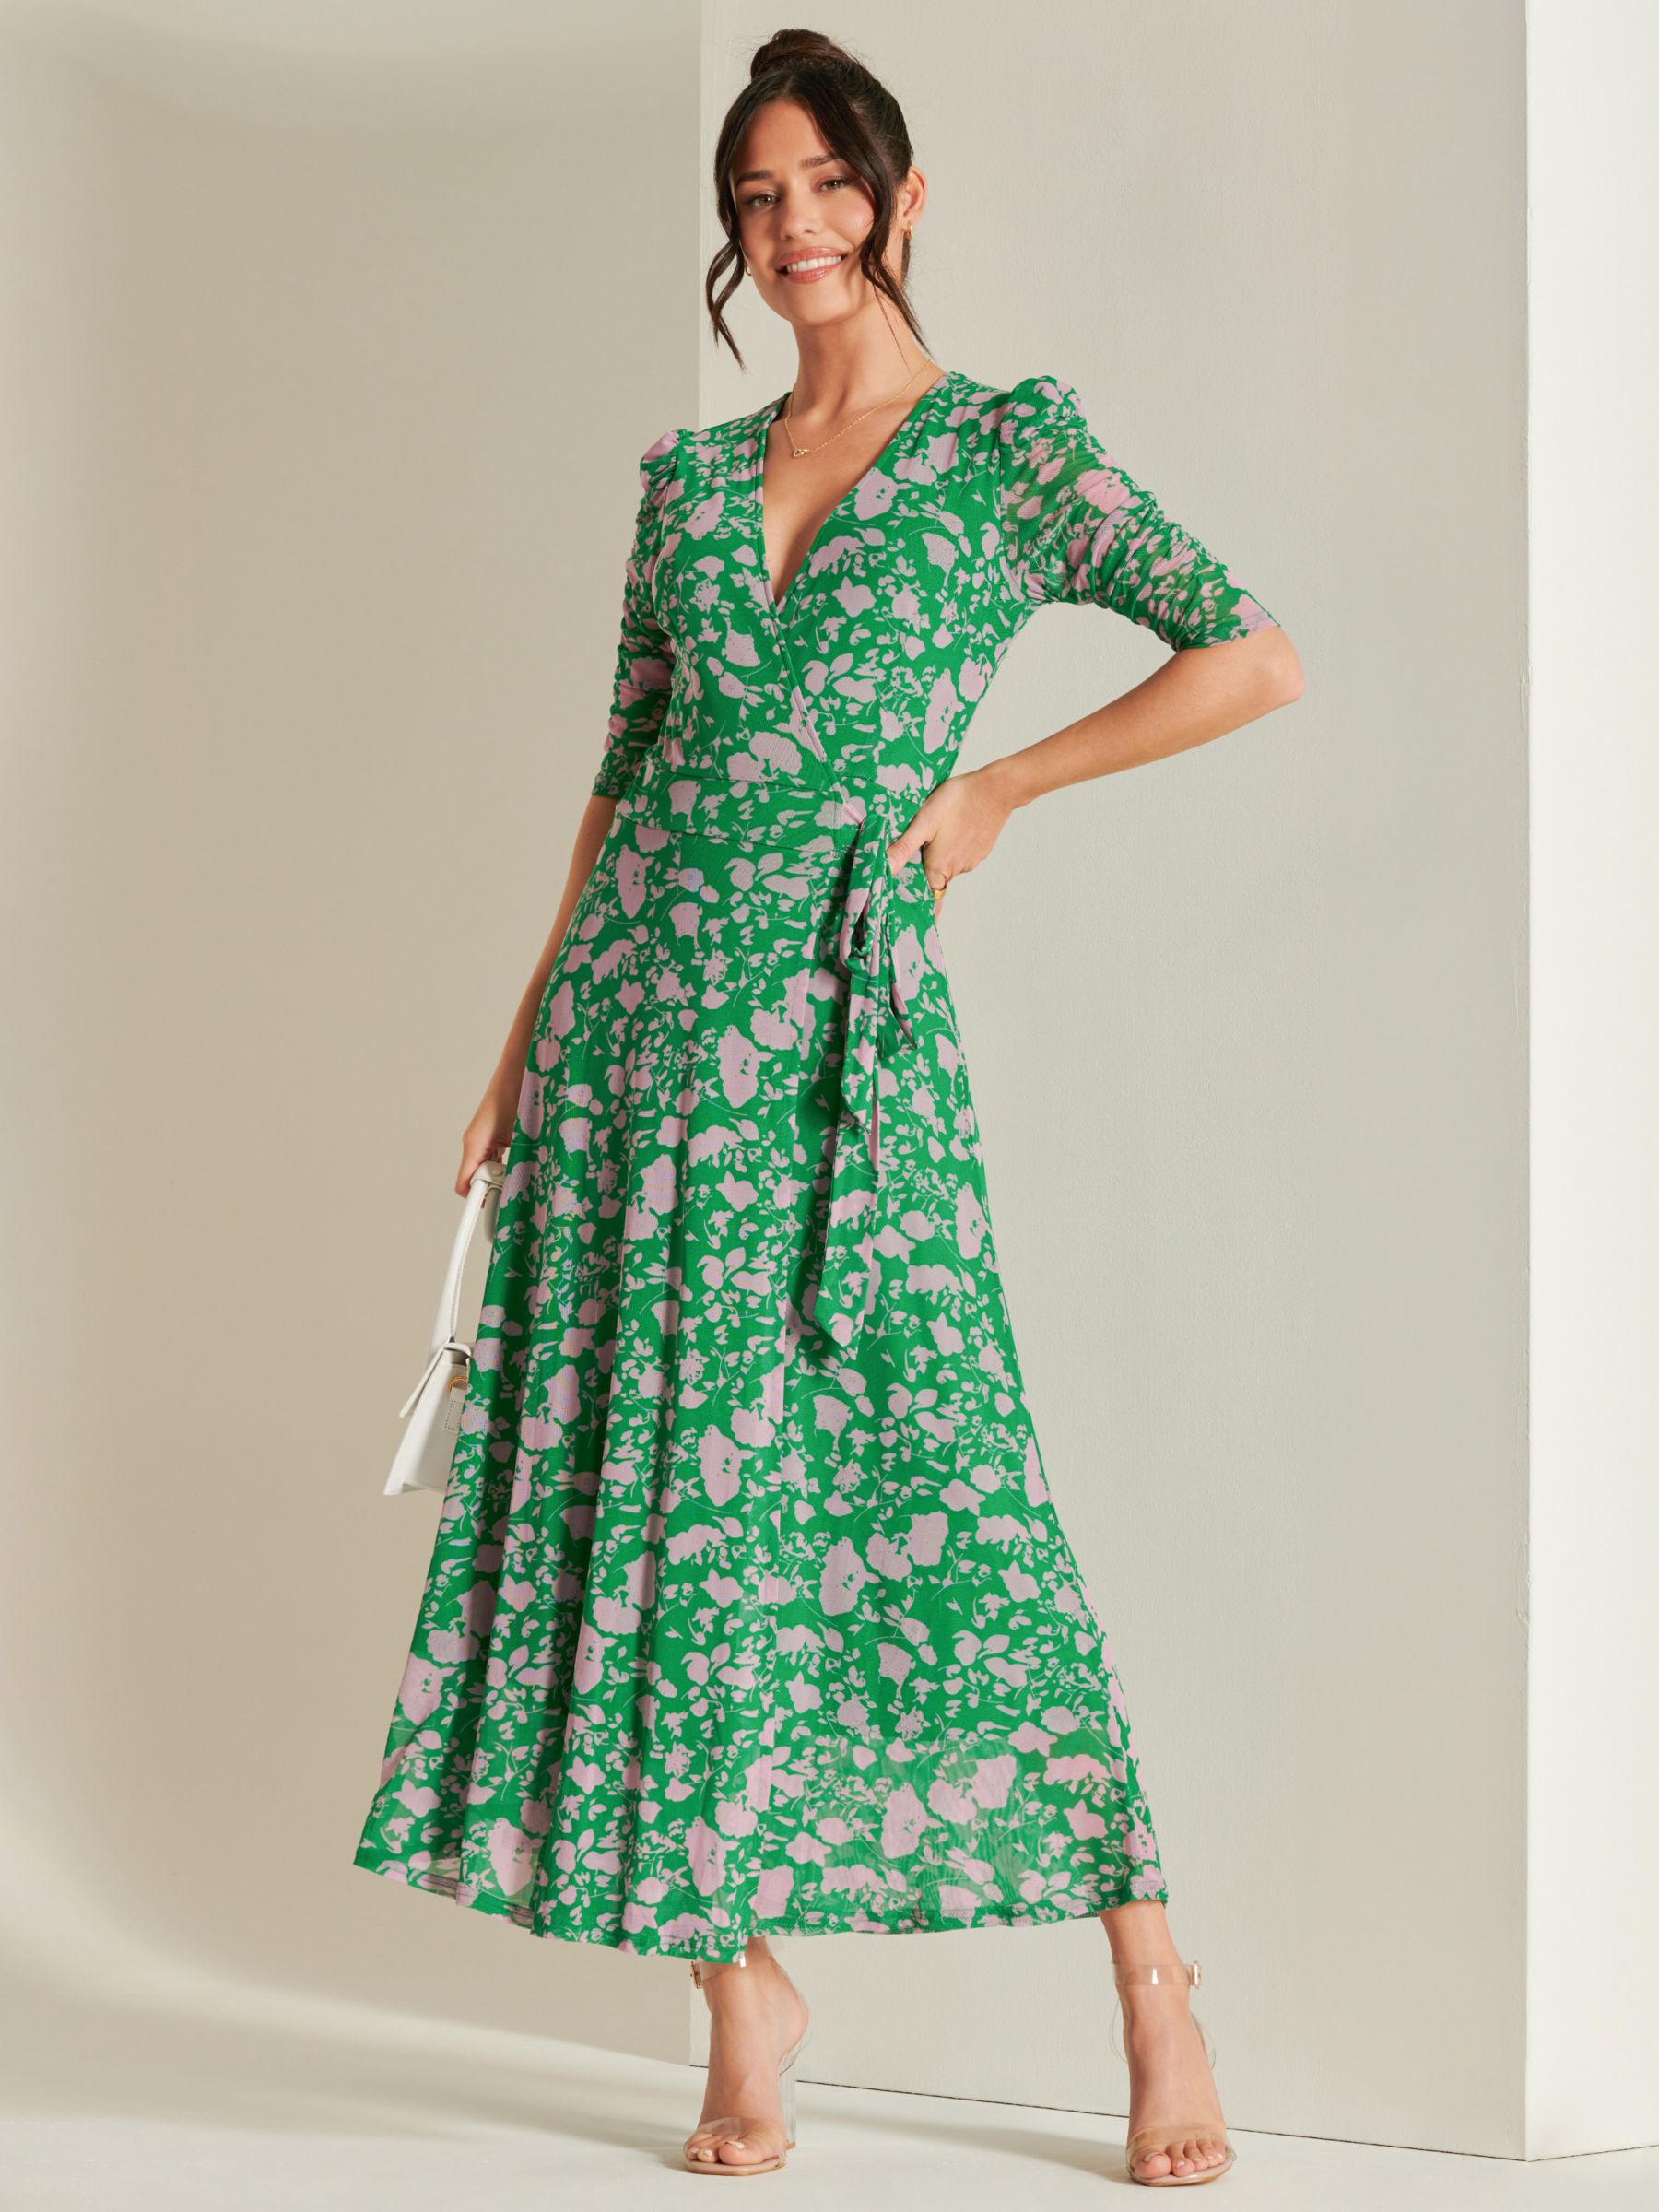 Jolie Moi Wrapped Mesh Maxi Dress, Green Floral at John Lewis & Partners